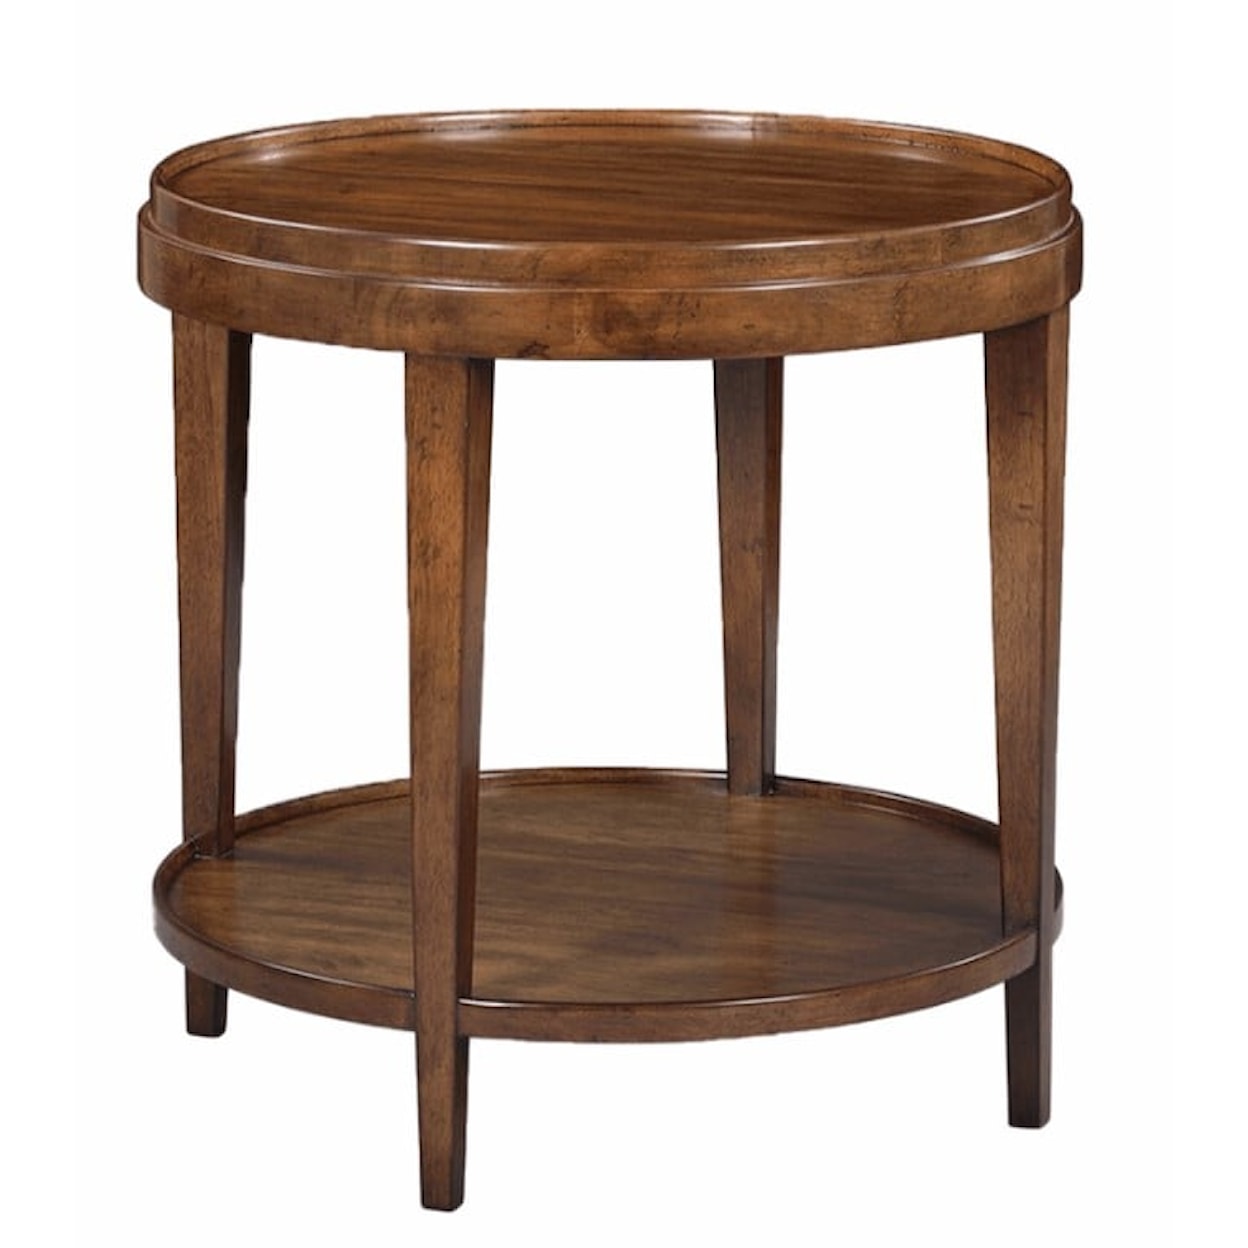 Oliver Home Furnishings End/ Side Tables ROUND SIDE TABLE W/ LIP TOP- RUSTIC